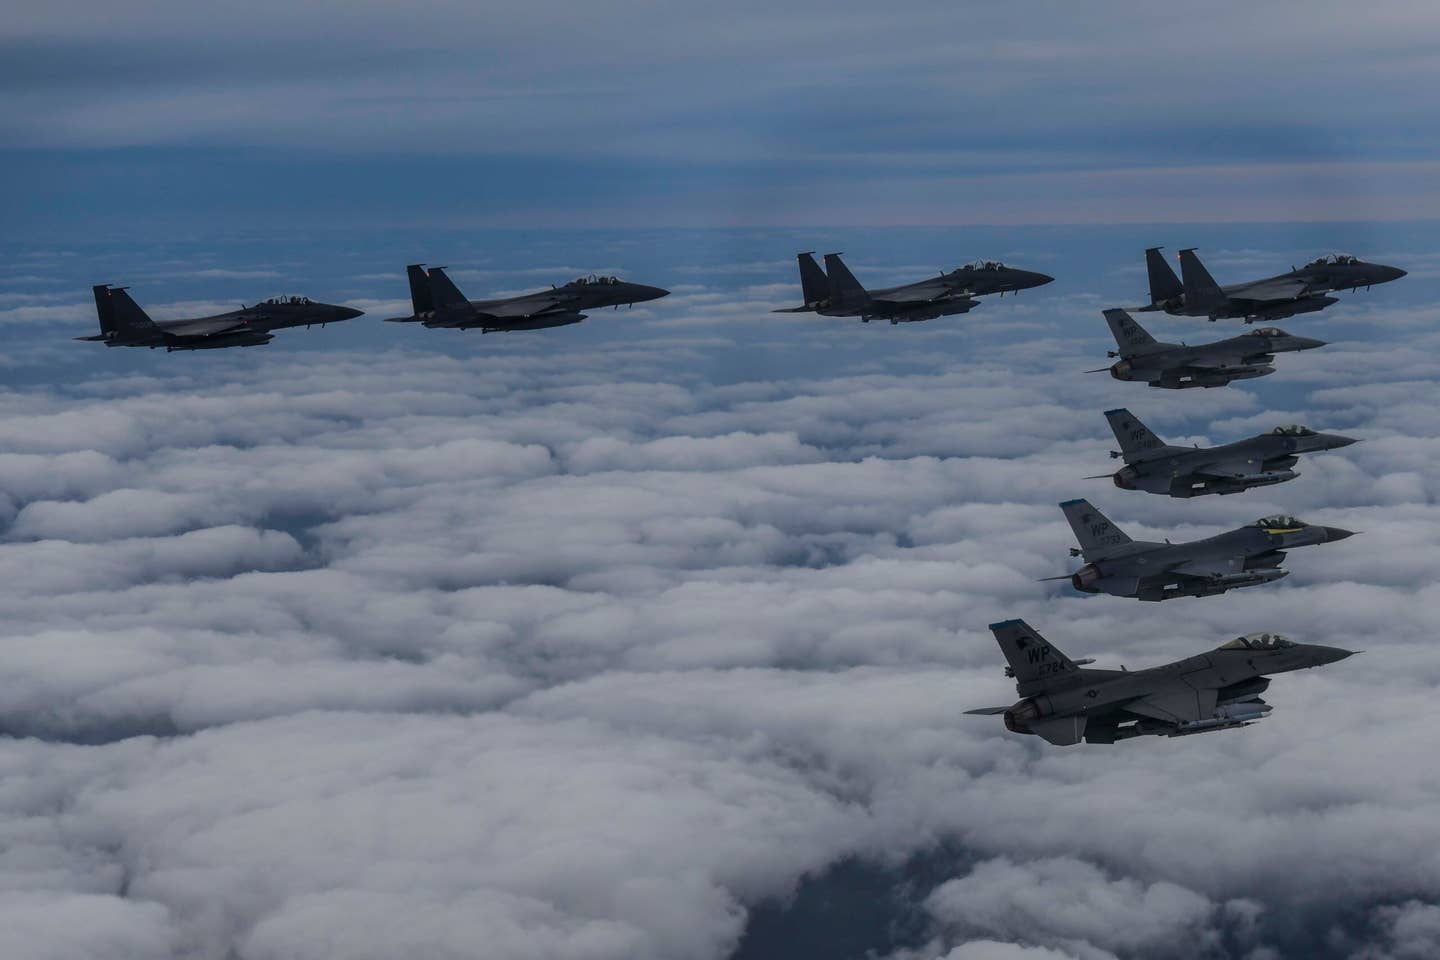 After North Korea launched a ballistic missile over Japan, U.S. Air Force F-16 Fighting Falcons from the 8th Fighter Wing carried out a live Joint Direct Attack Munition (JDAM) strike with Republic of Korea Air Force (ROKAF) F-15Ks from the 11th Fighter Wing. (ROKAF photo)